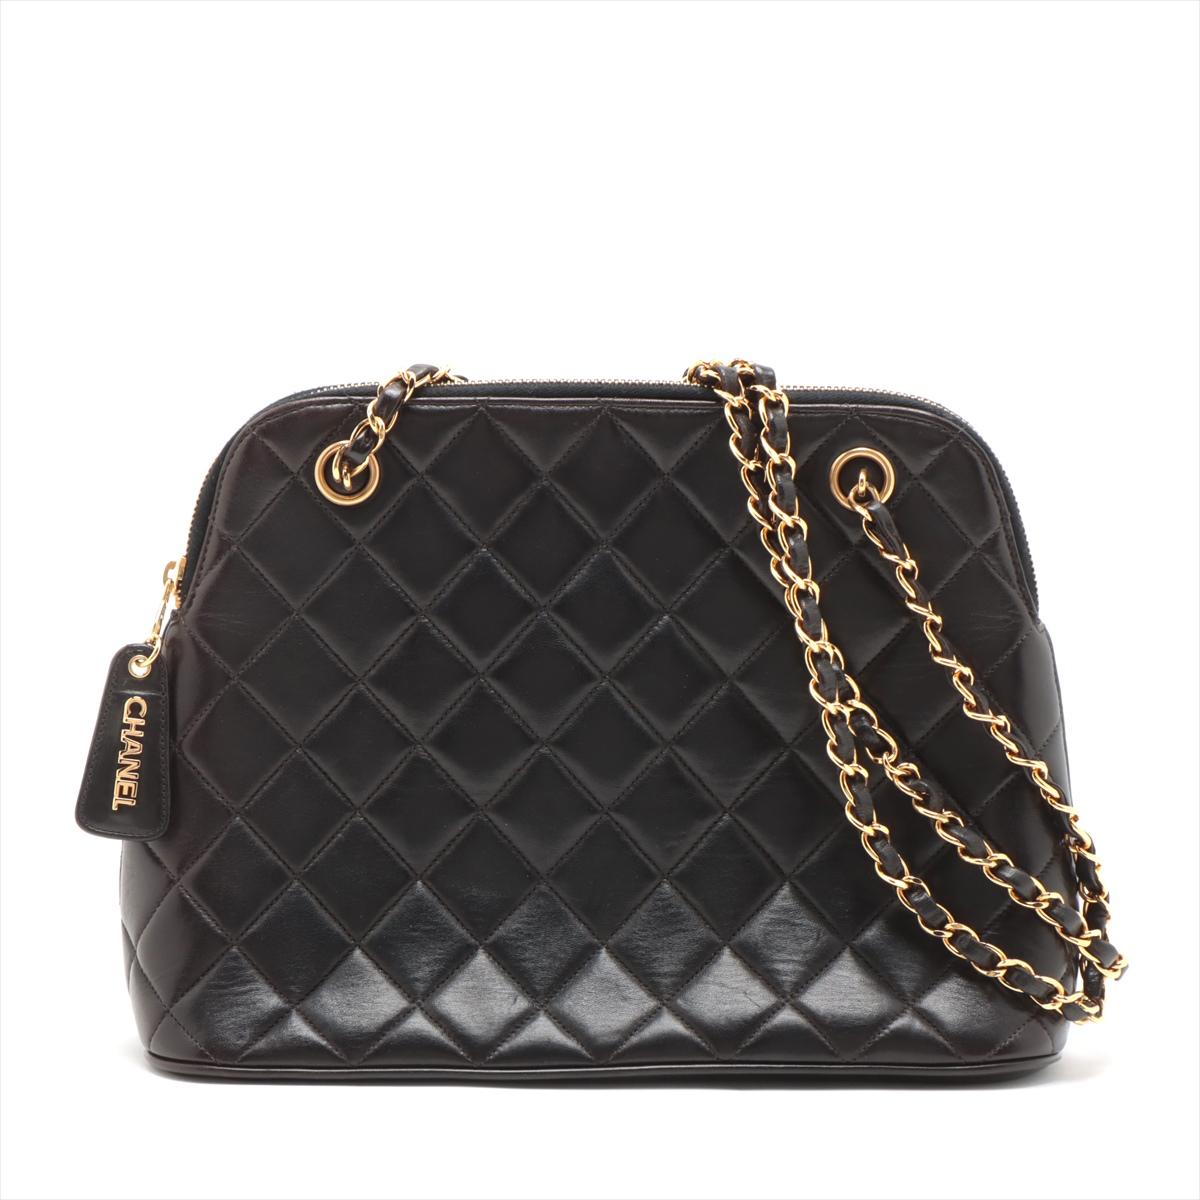 The Chanel Matelassé Lambskin Chain Shoulder Bag in Black epitomizes timeless elegance and luxury. Crafted from supple lambskin leather, the bag features Chanel's iconic quilted pattern, showcasing meticulous craftsmanship and attention to detail.